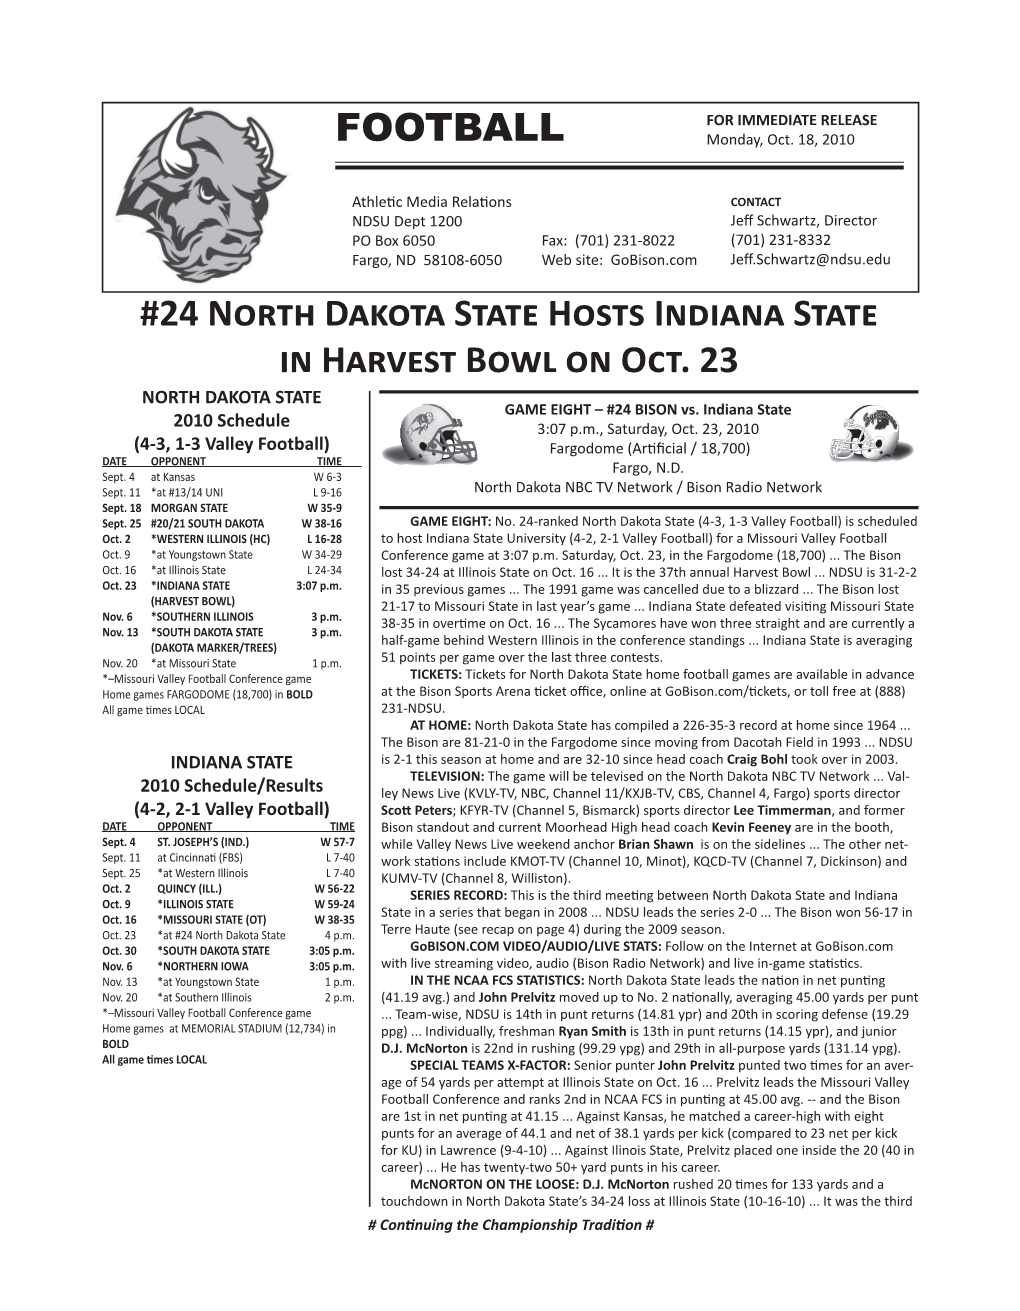 24 North Dakota State Hosts Indiana State in Harvest Bowl on Oct